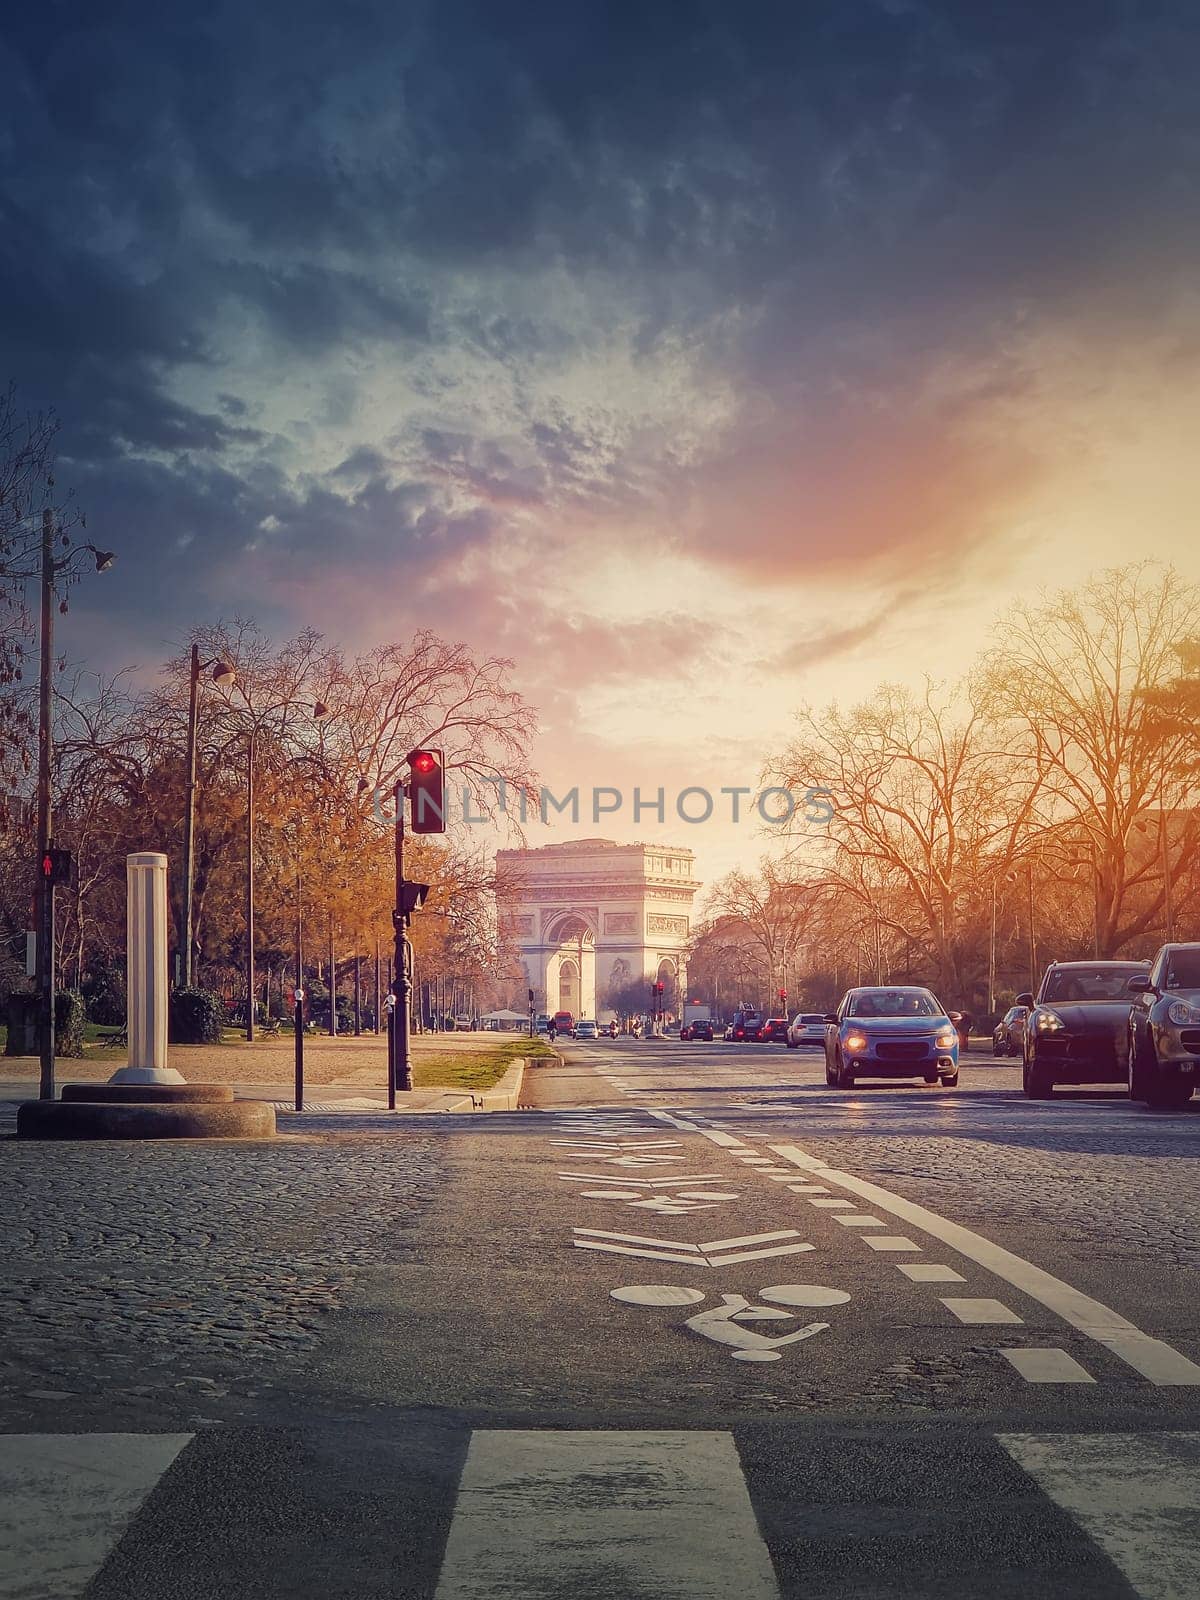 Triumphal Arch (Arc de triomphe) in Paris, France. The famous historic landmark in sunset light seen from the city street with busy traffic